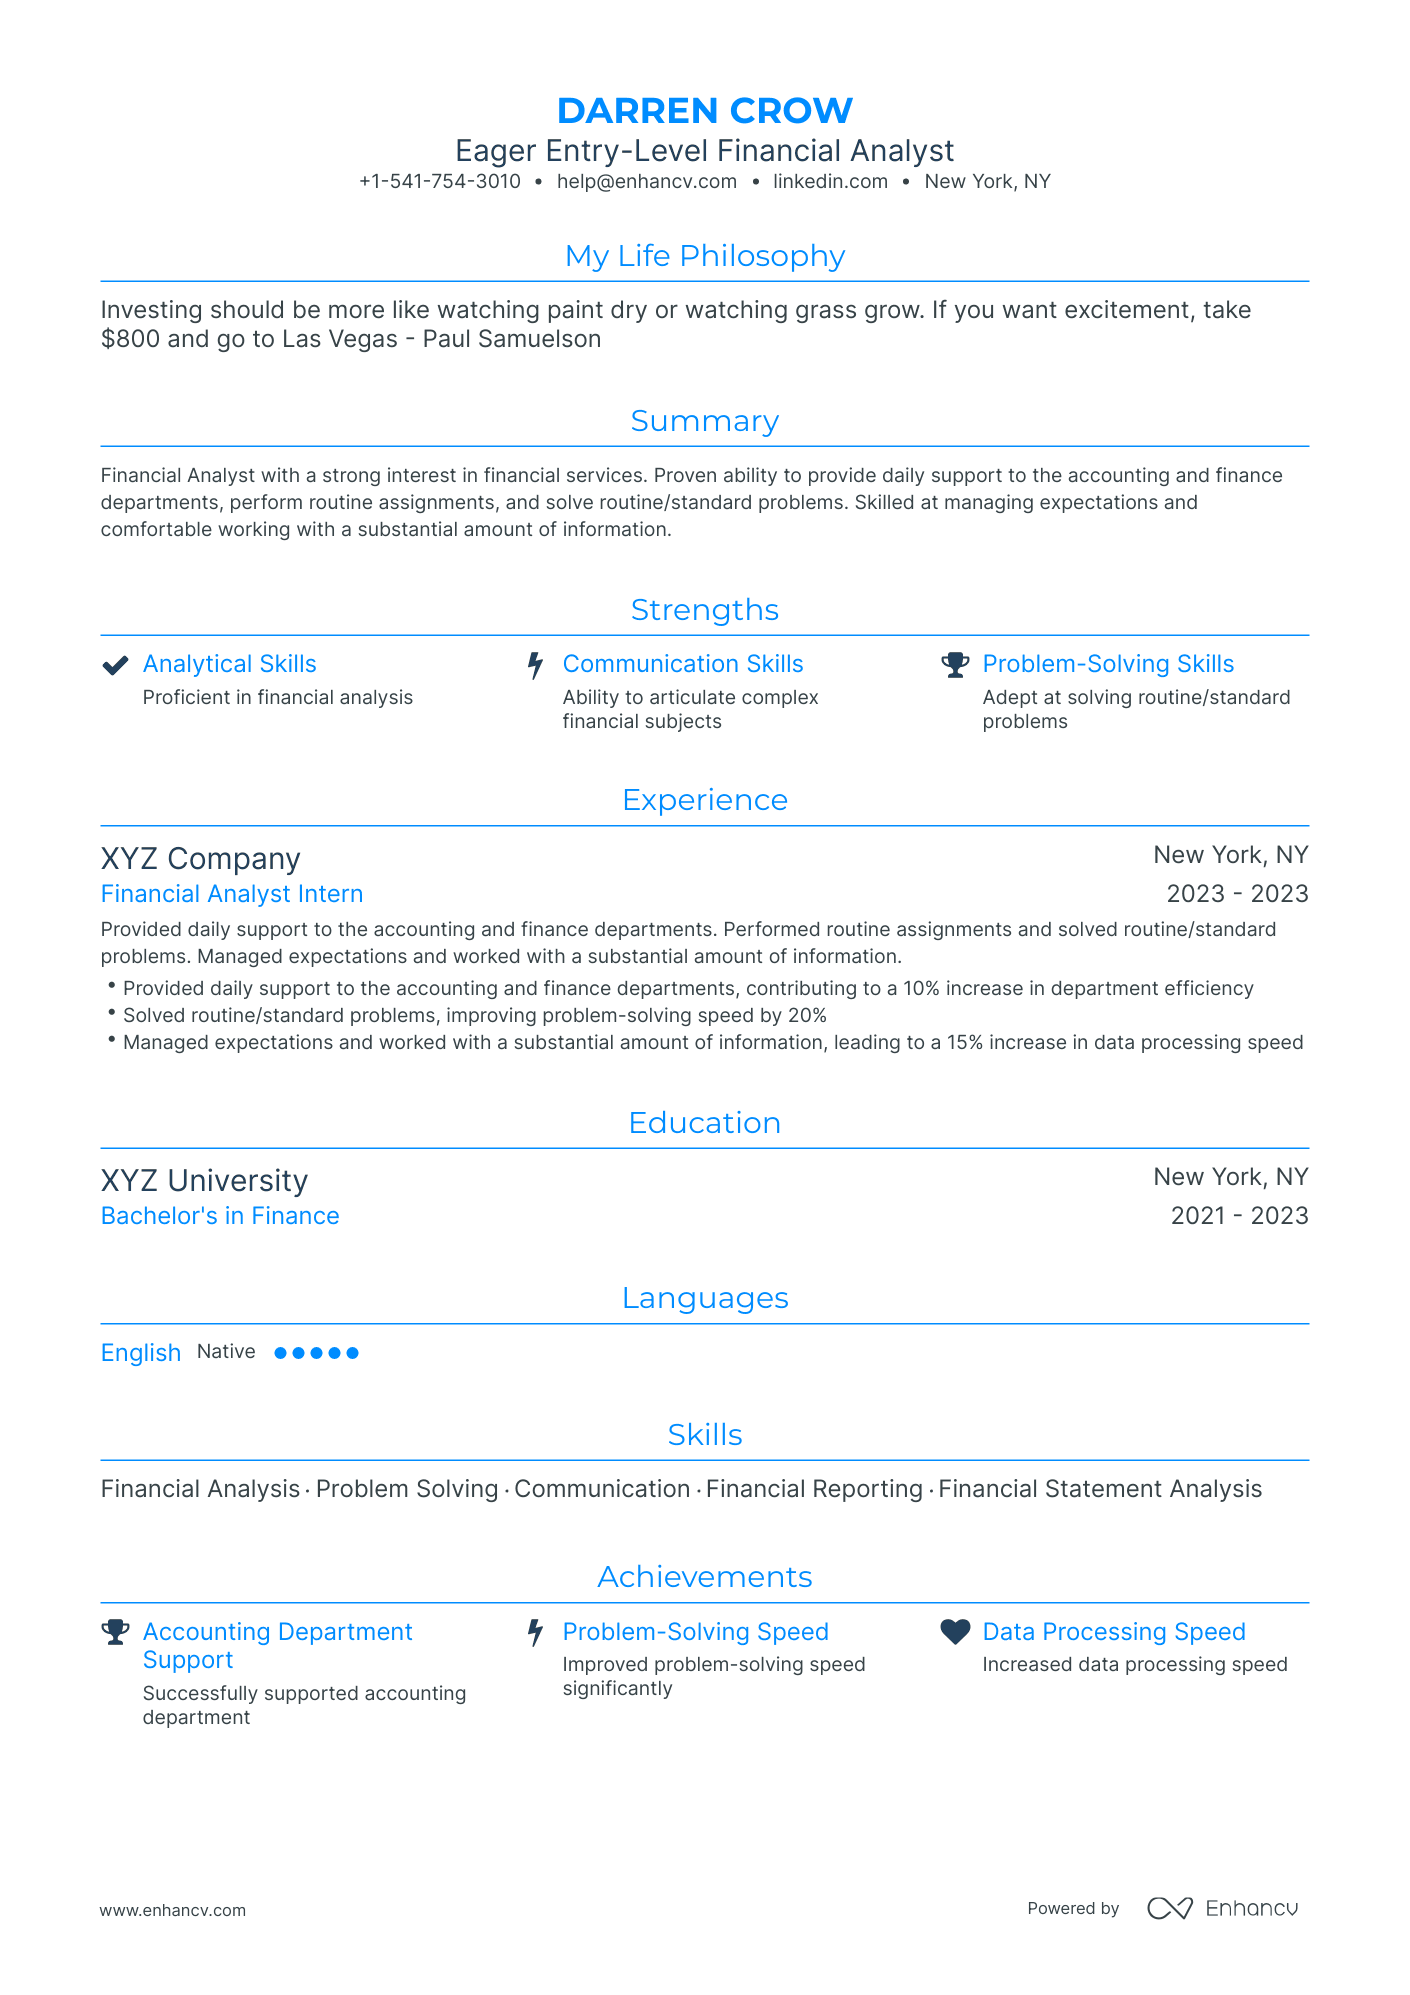 Traditional Entry Level Financial Analyst Resume Template